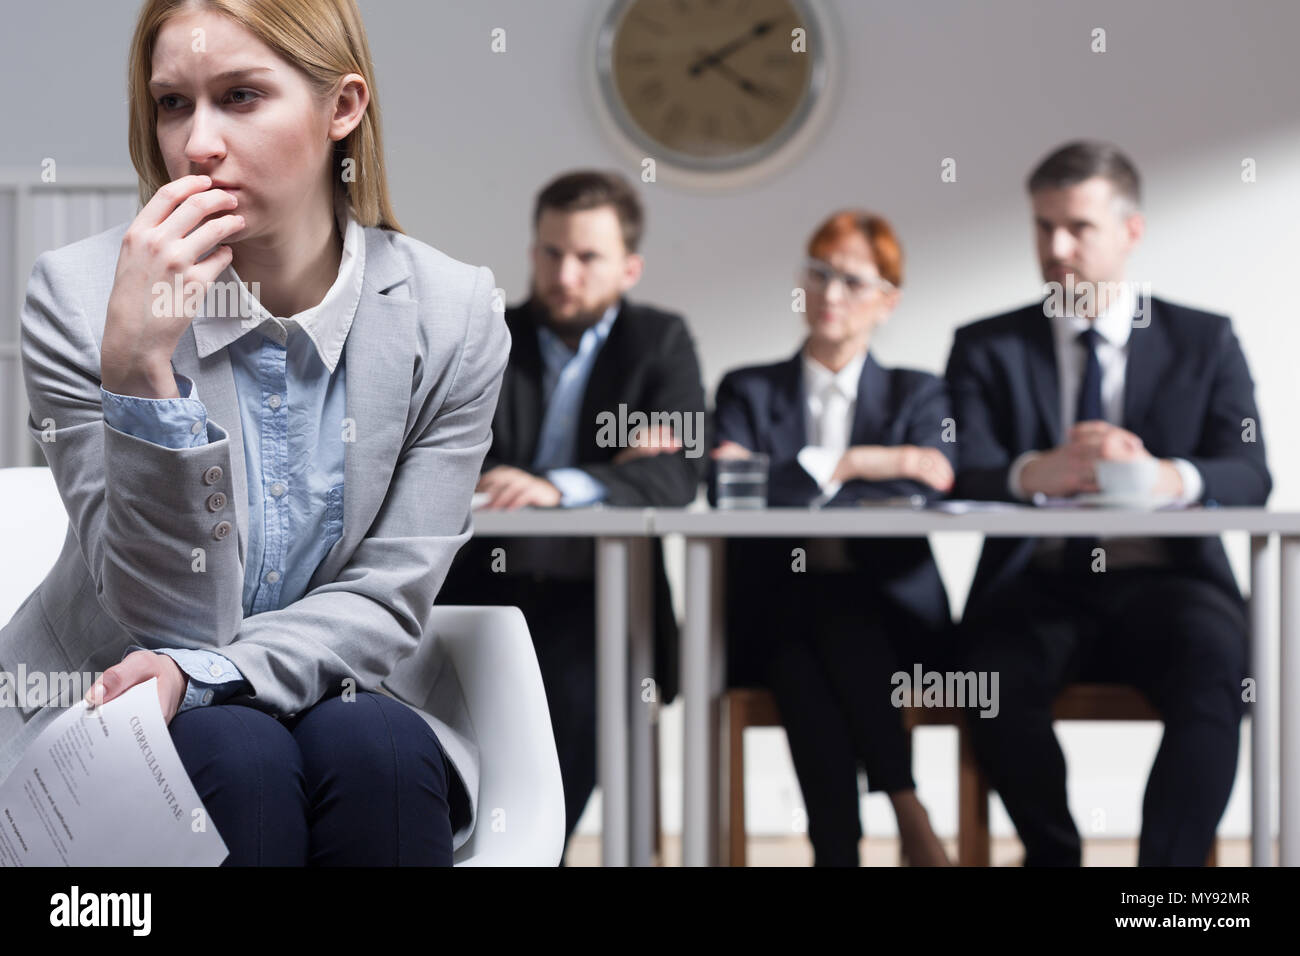 Sad woman holding CV and three businesspeople sitting beside table Stock Photo